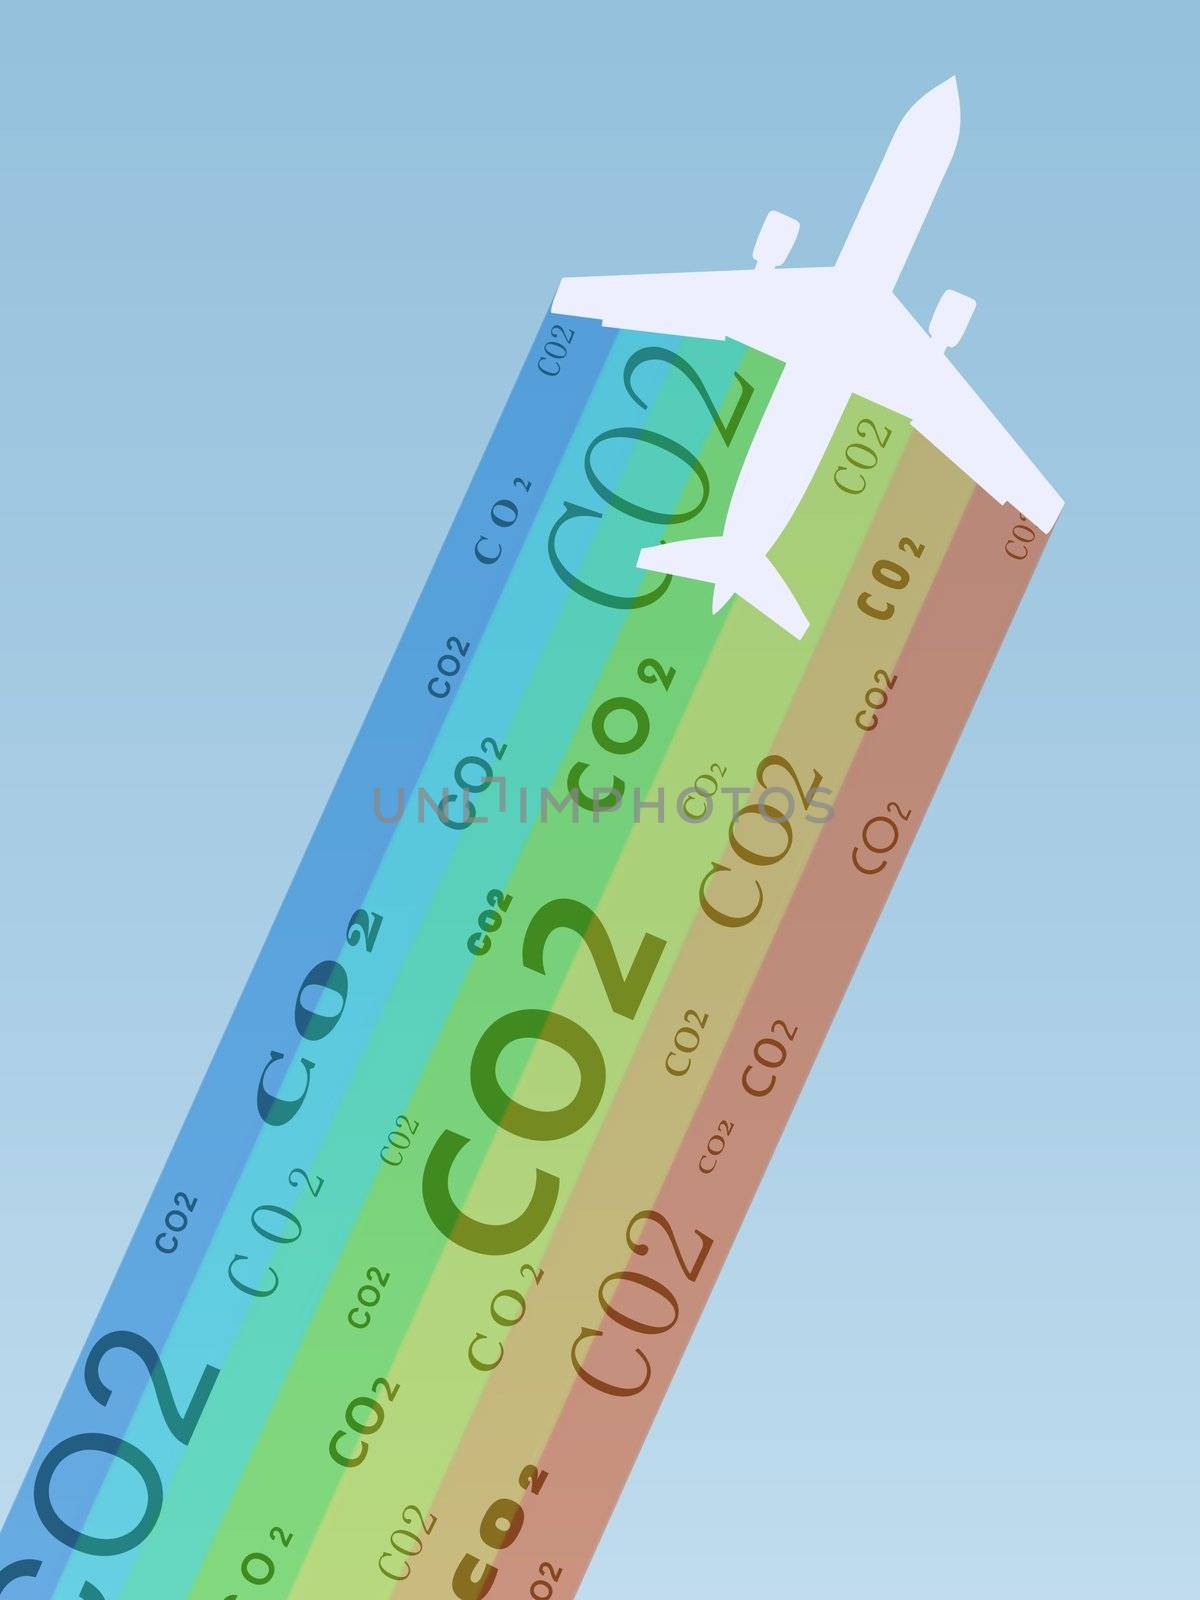 Illustration of an aeroplane with CO2 text